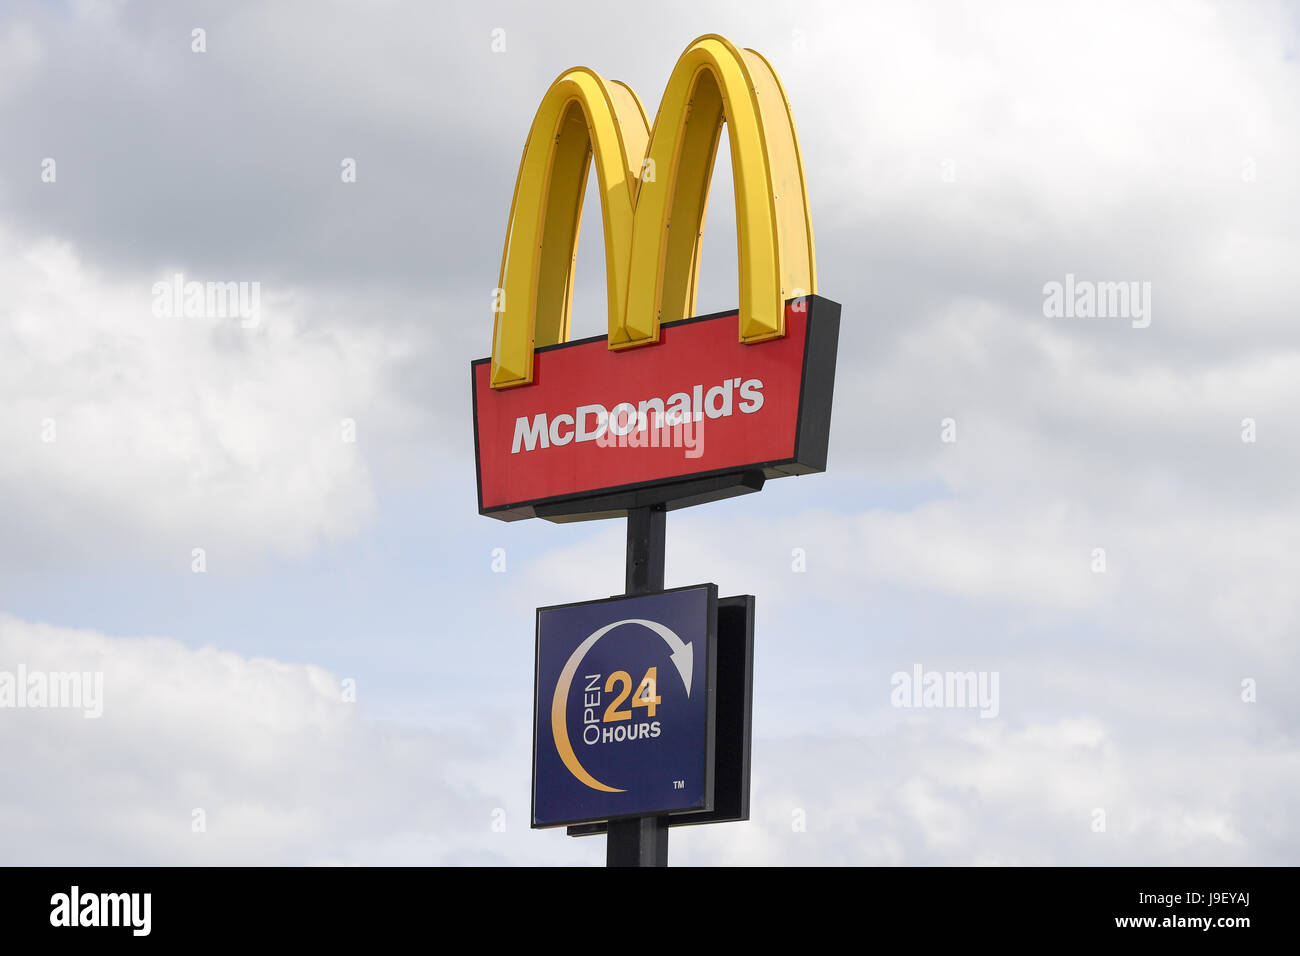 McDonalds sign in the UK Stock Photo